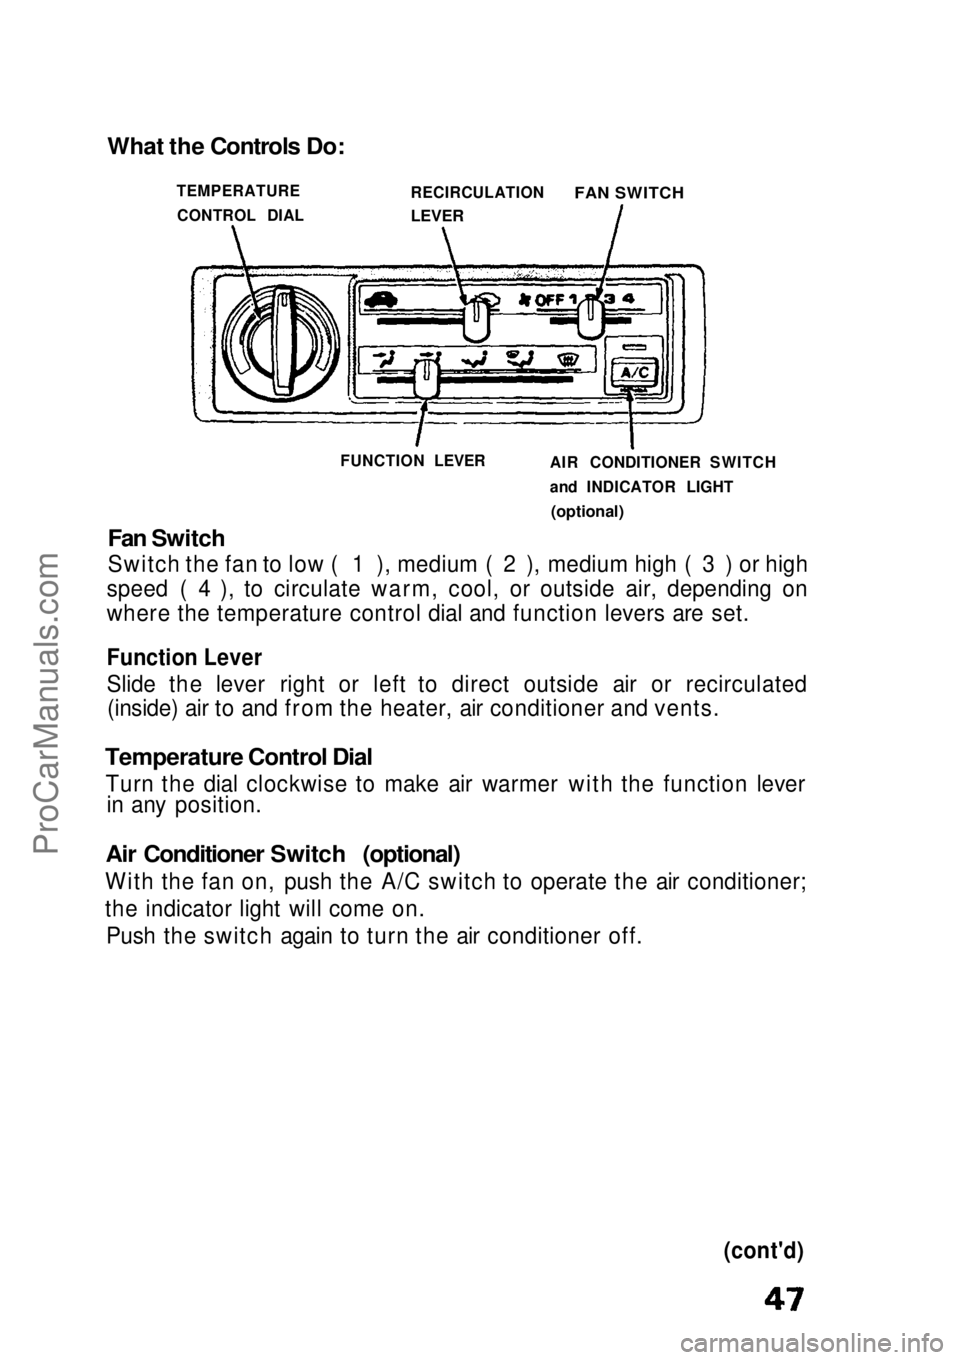 HONDA CIVIC 1991  Owners Manual 
Fan Switch

Switch the fan to low ( 1 ), medium ( 2 ), medium high ( 3 ) or high
speed ( 4 ), to circulate warm, cool, or outside air, depending on
where the temperature control dial and function lev